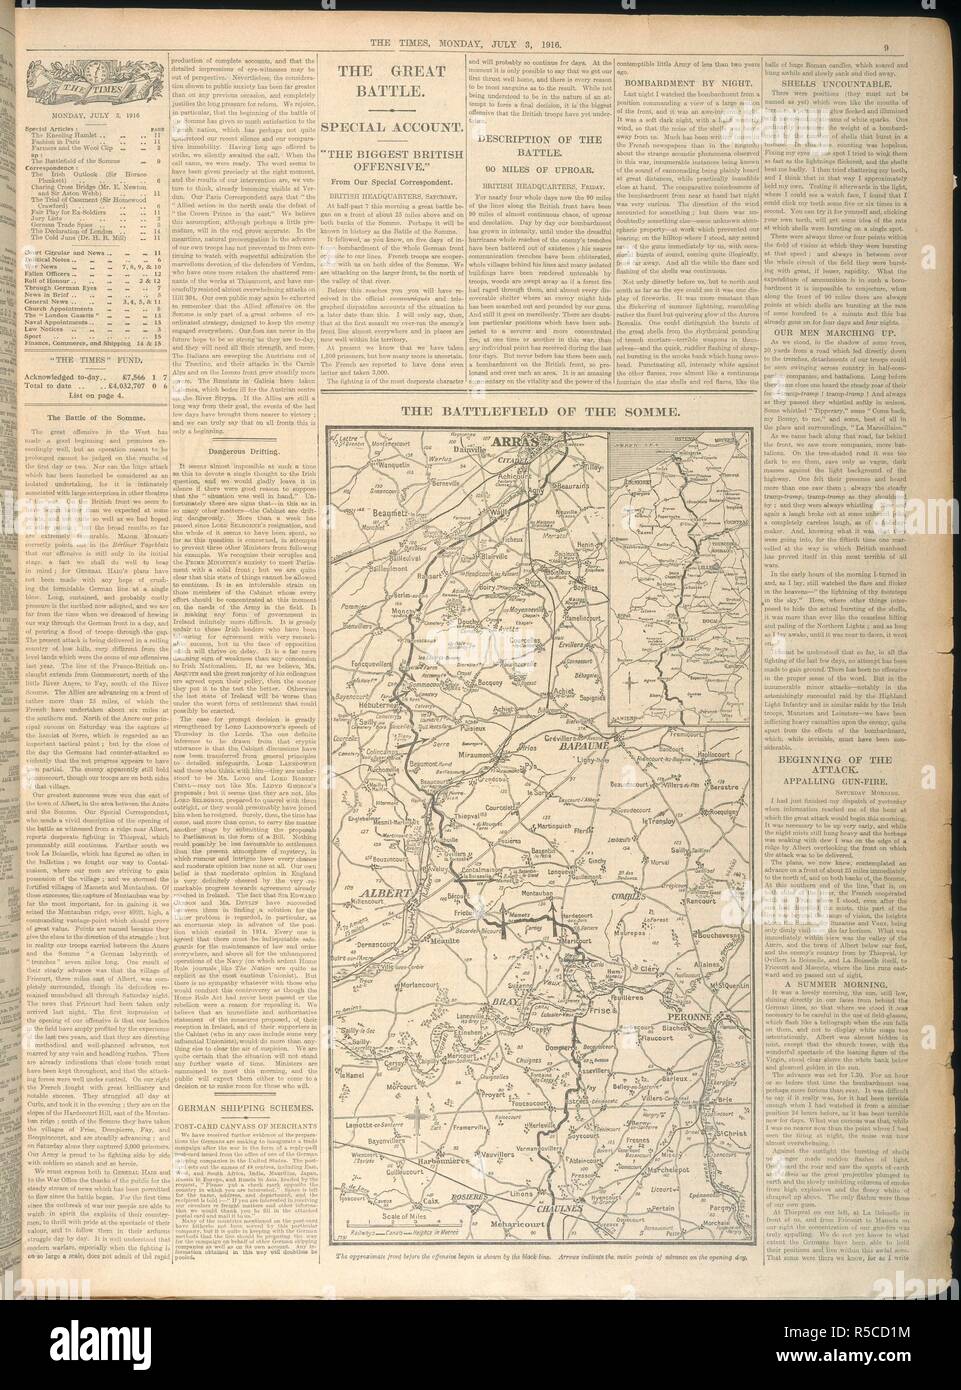 Newspaper article on the Battle of the Somme, with a map. The Times. 03-Jul-16. Source: The Times, 03 July, 1916, page 9. Stock Photo